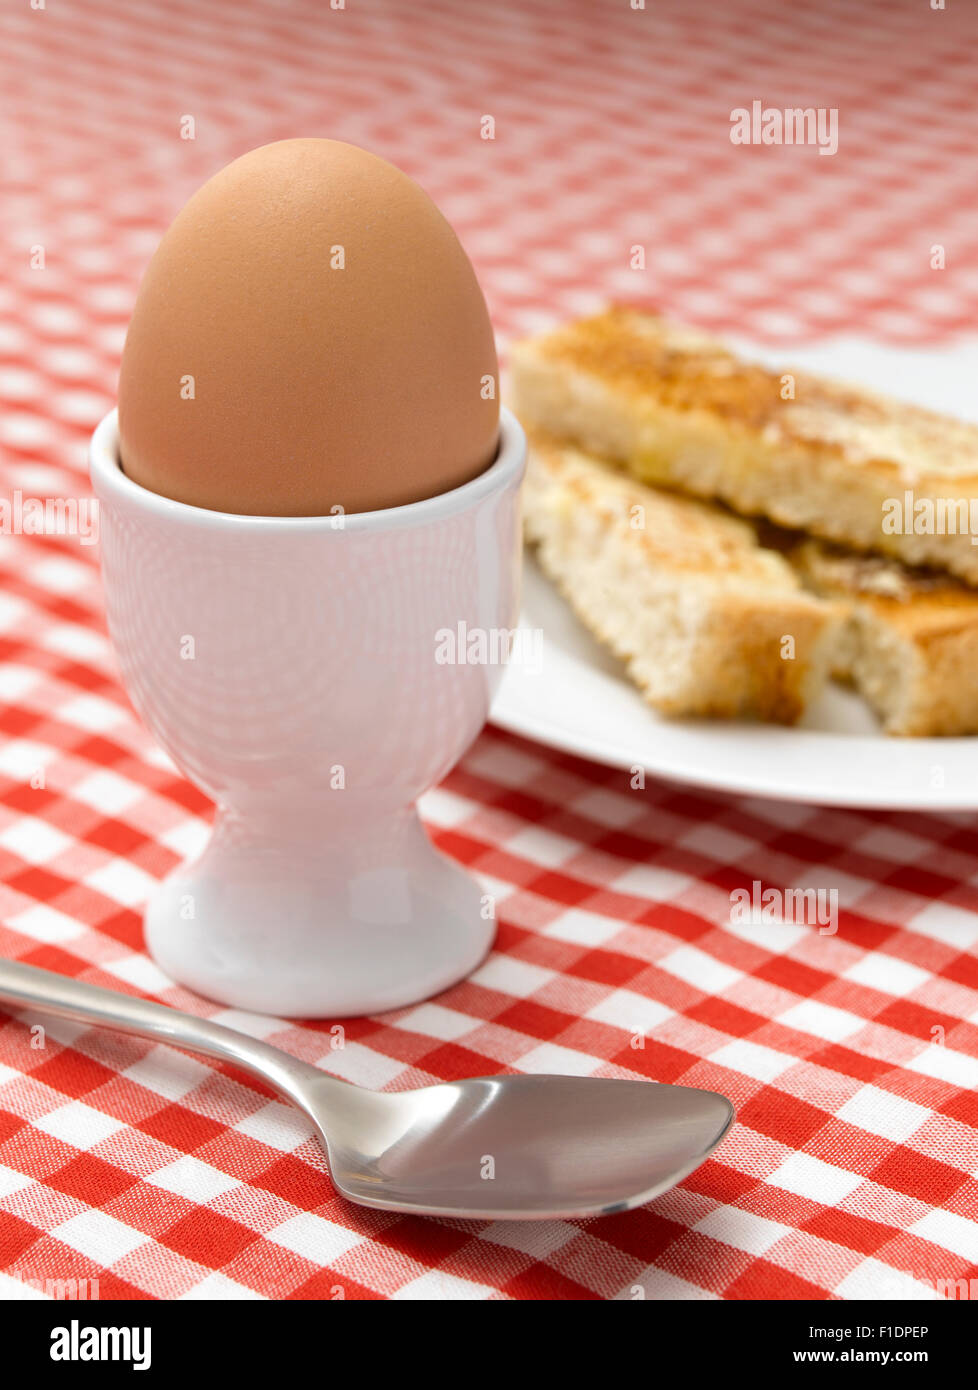 Boiled Egg on Gingham tablecloth Stock Photo